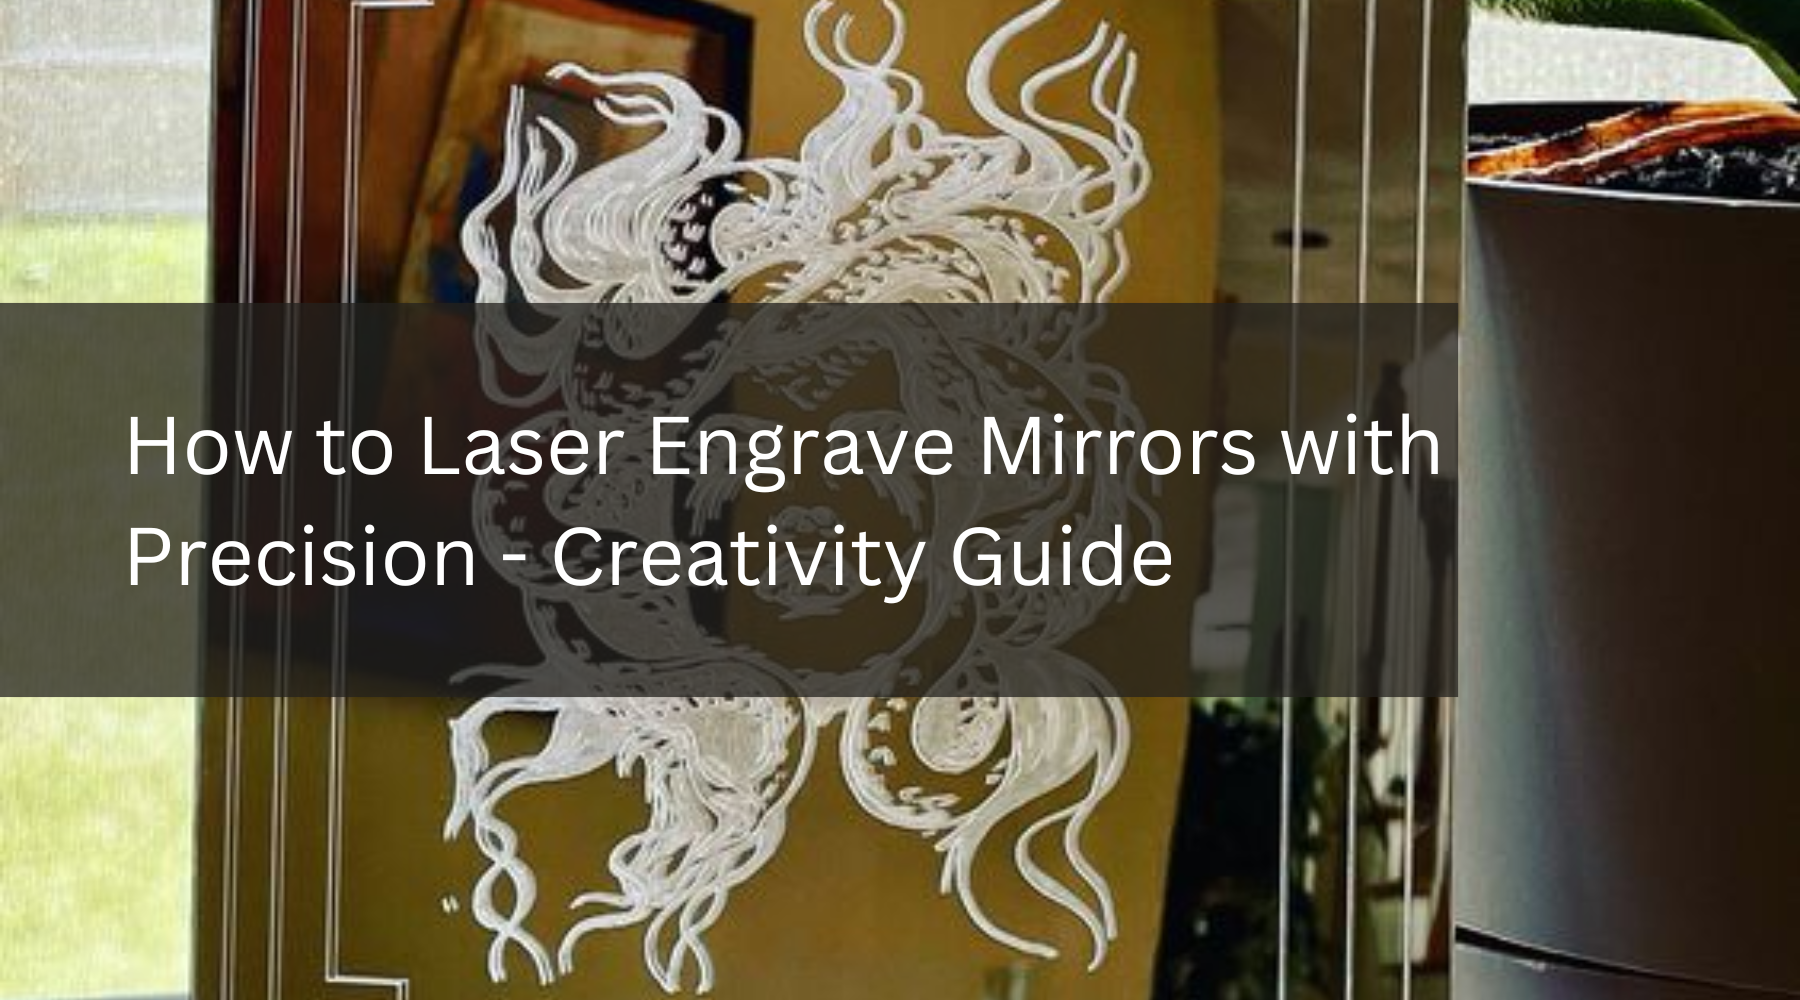 How to Laser Engrave Mirrors with Precision - Creativity Guide